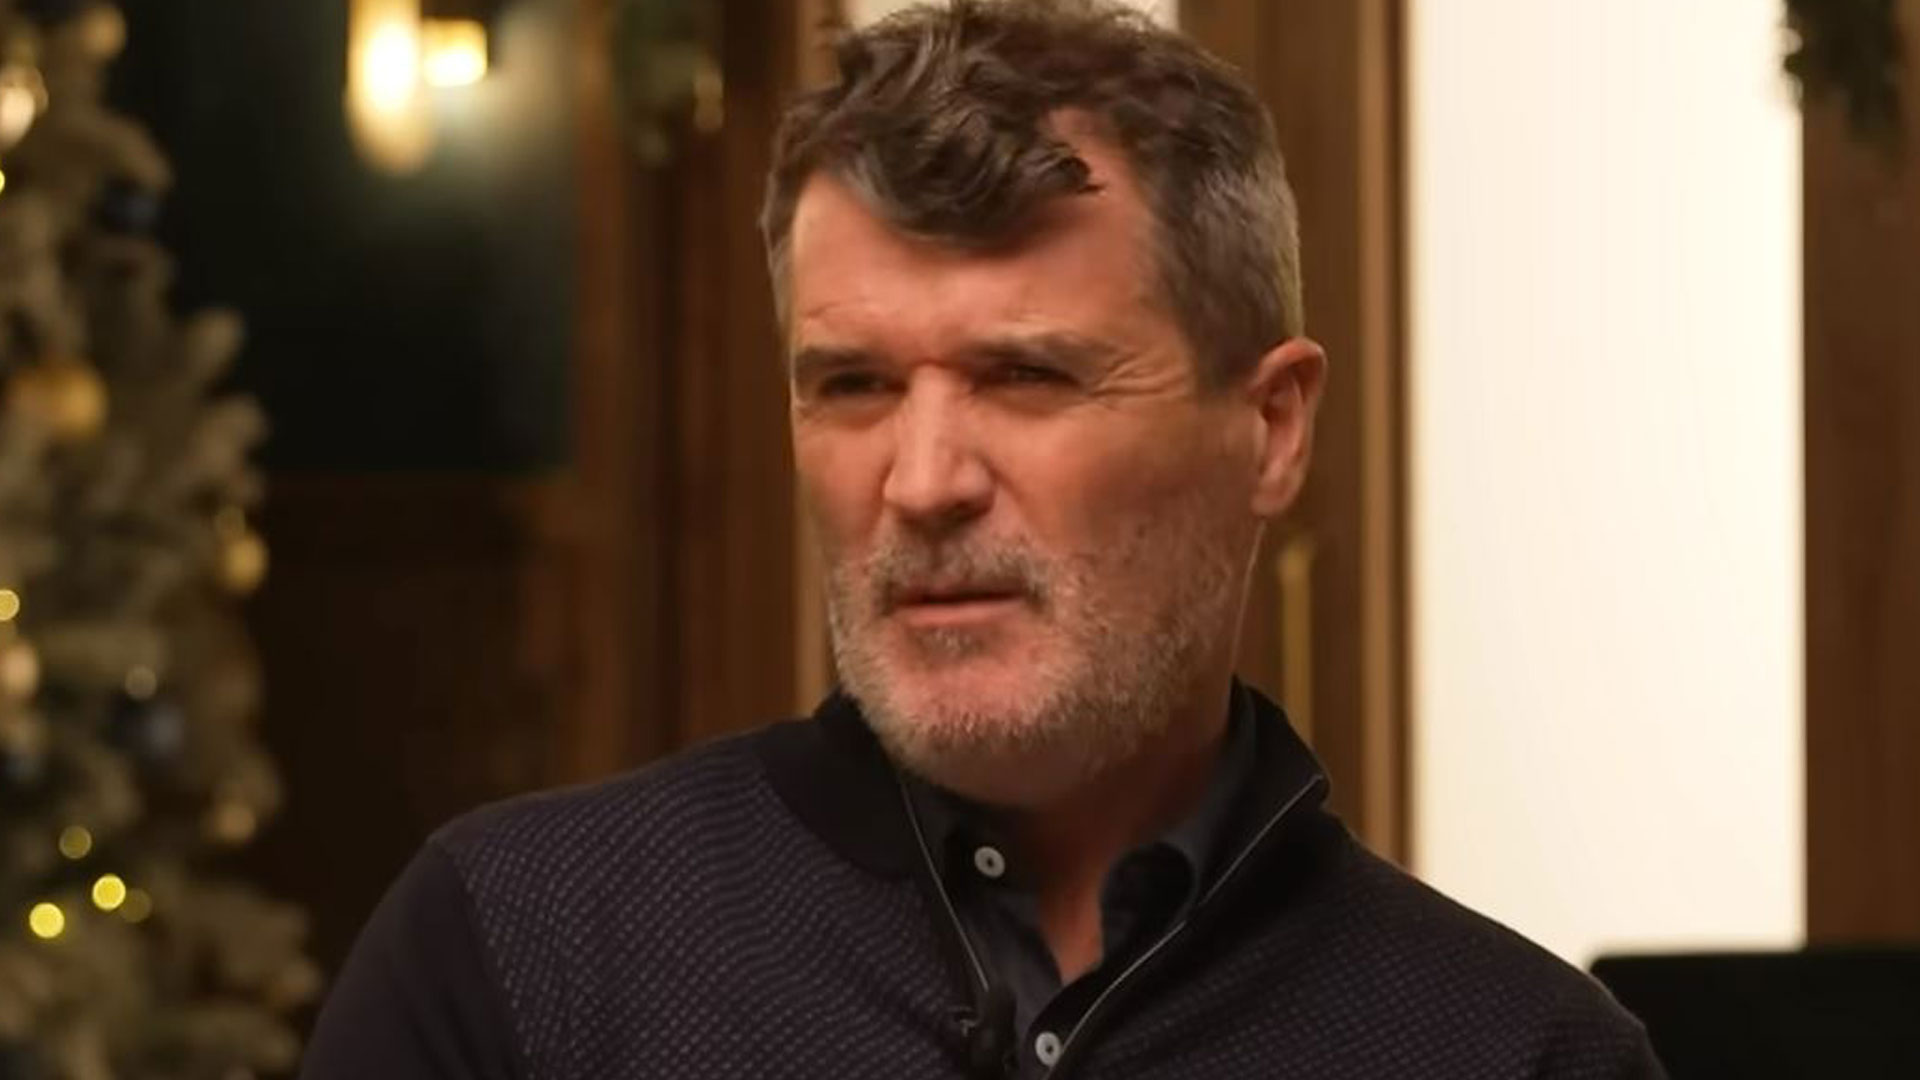 Man Utd legend Roy Keane says Christmas is for children and refuses to buy anyone anything